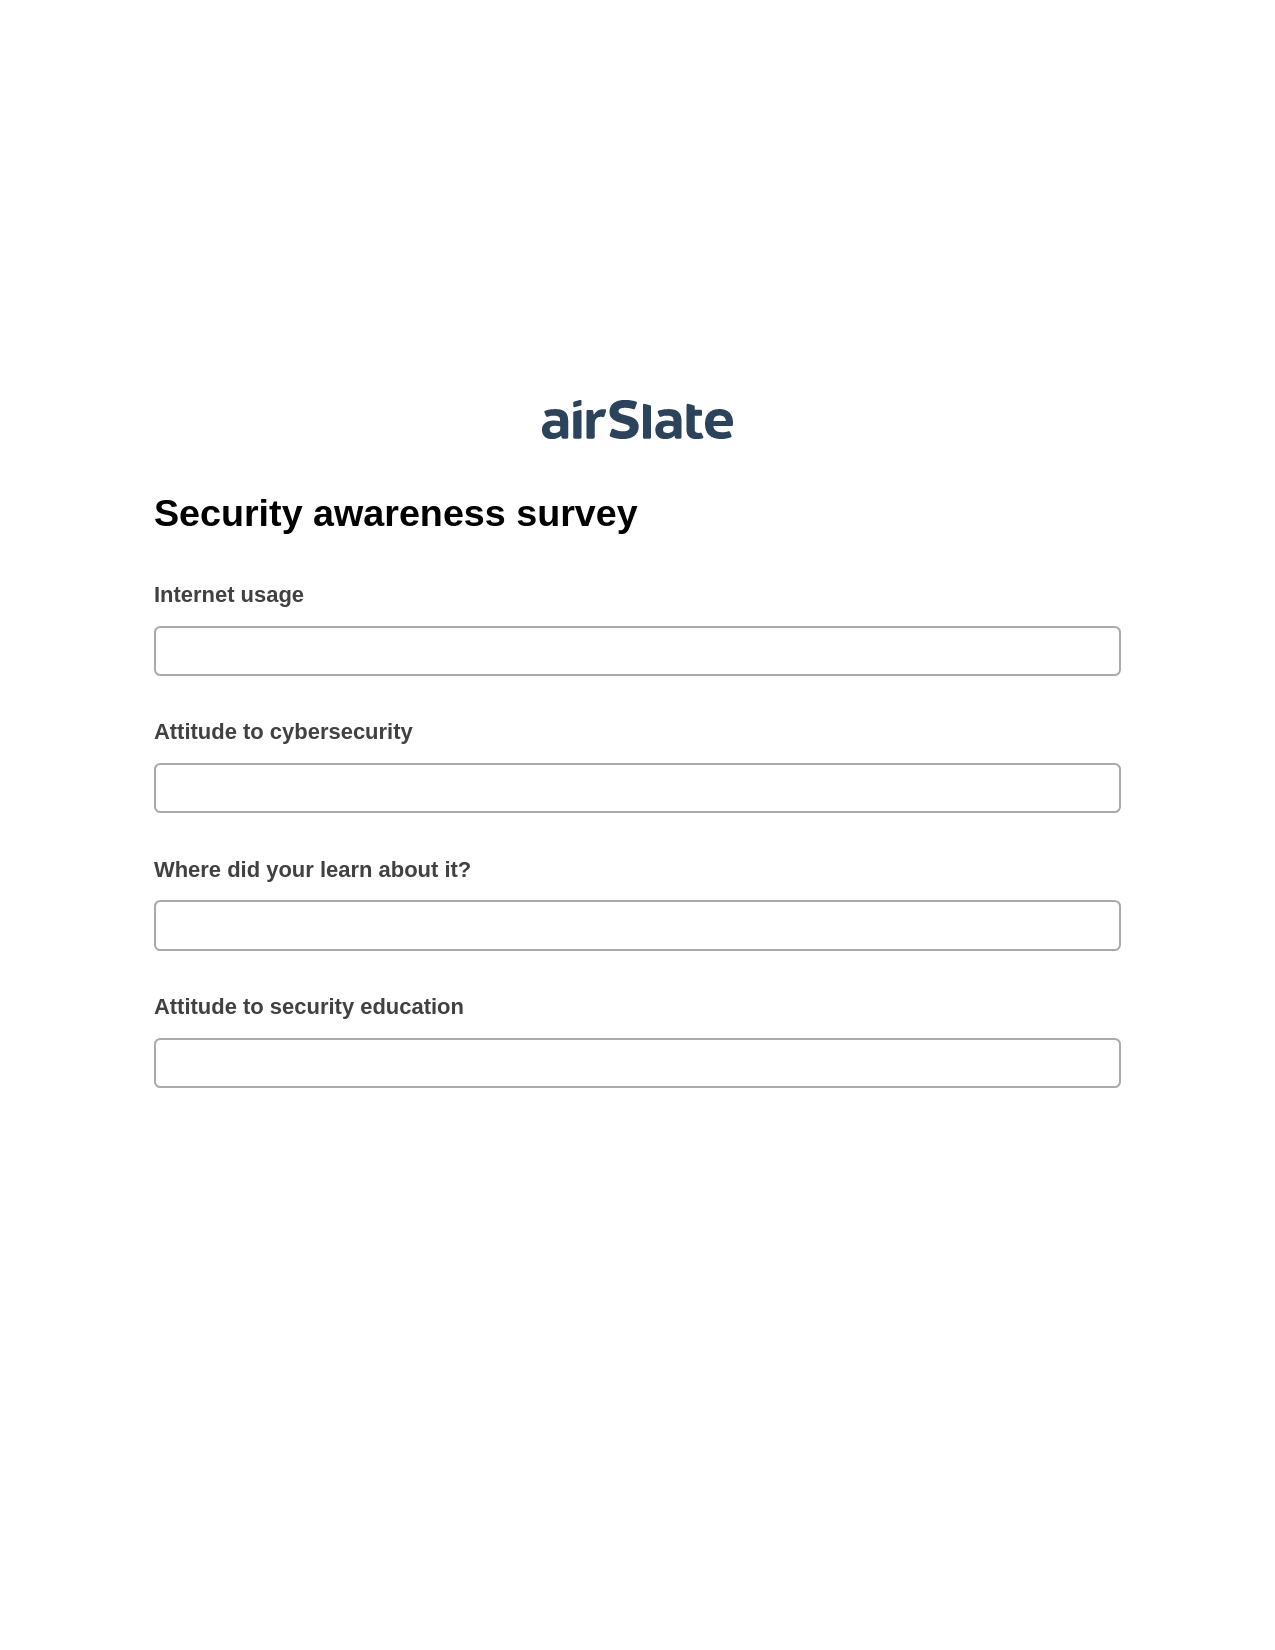 Security awareness survey Pre-fill from Salesforce Record Bot, Mailchimp send Campaign bot, Export to Excel 365 Bot